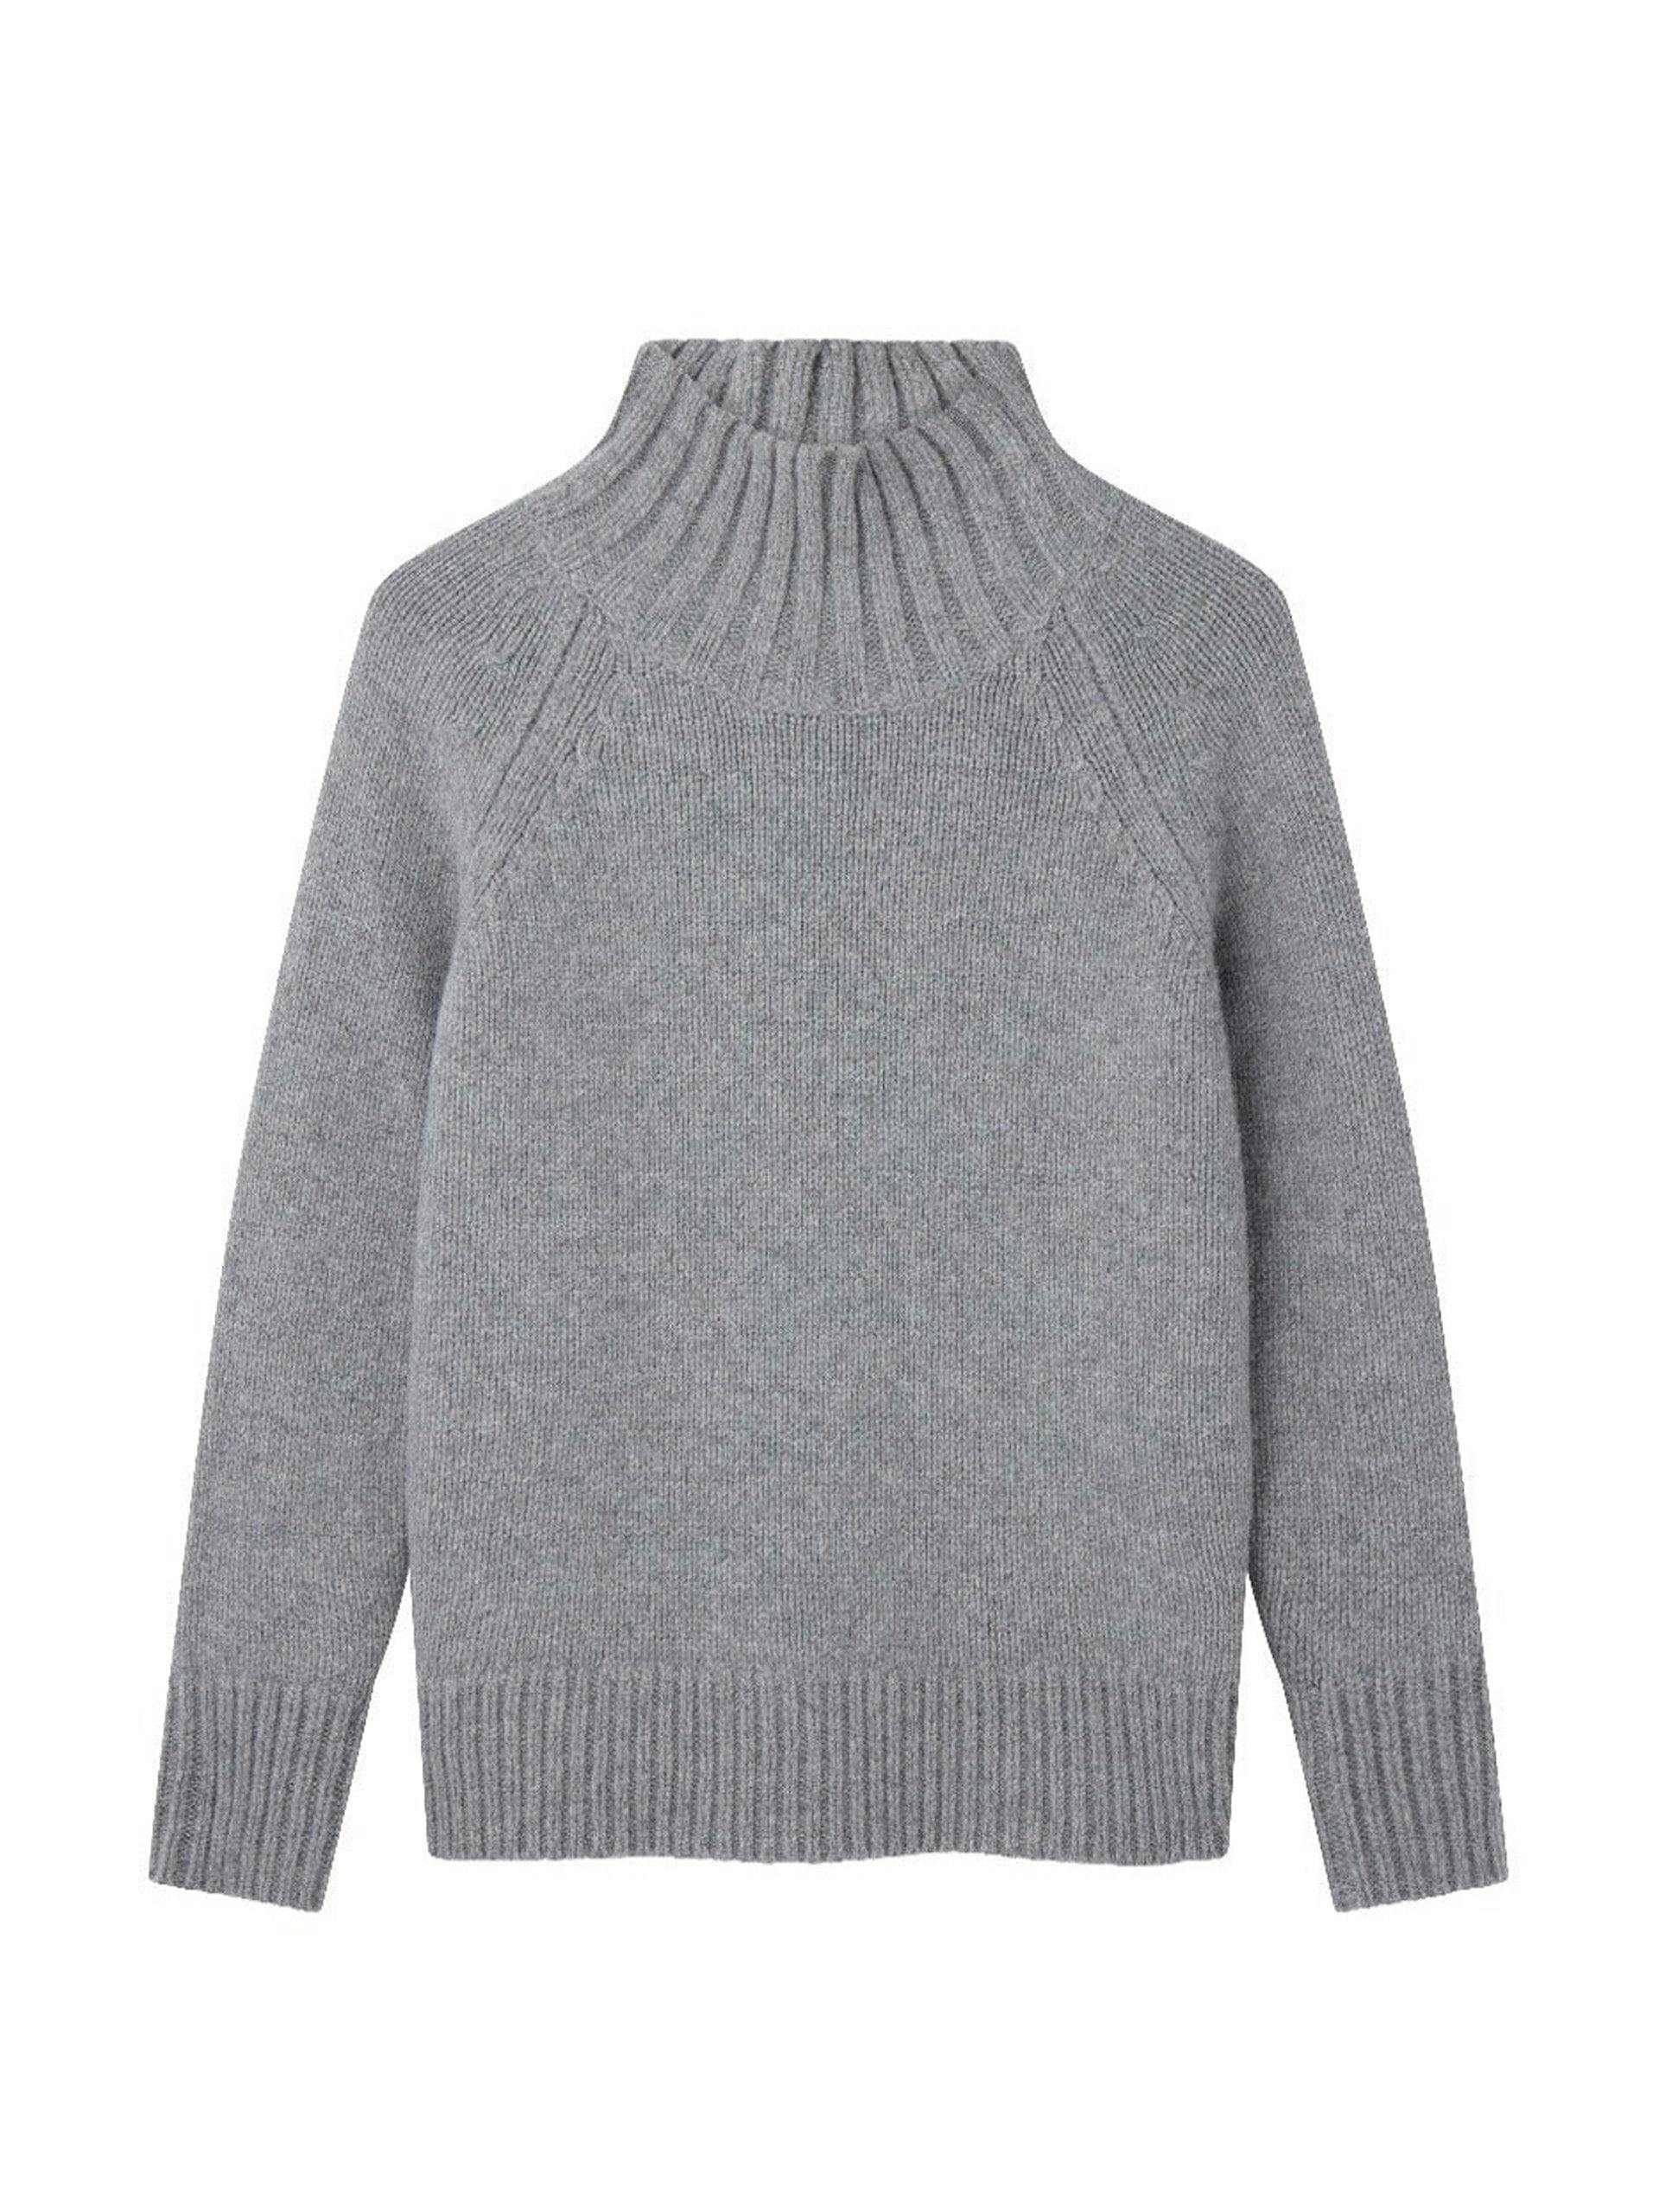 Storm grey wool Authentic funnel neck jumper